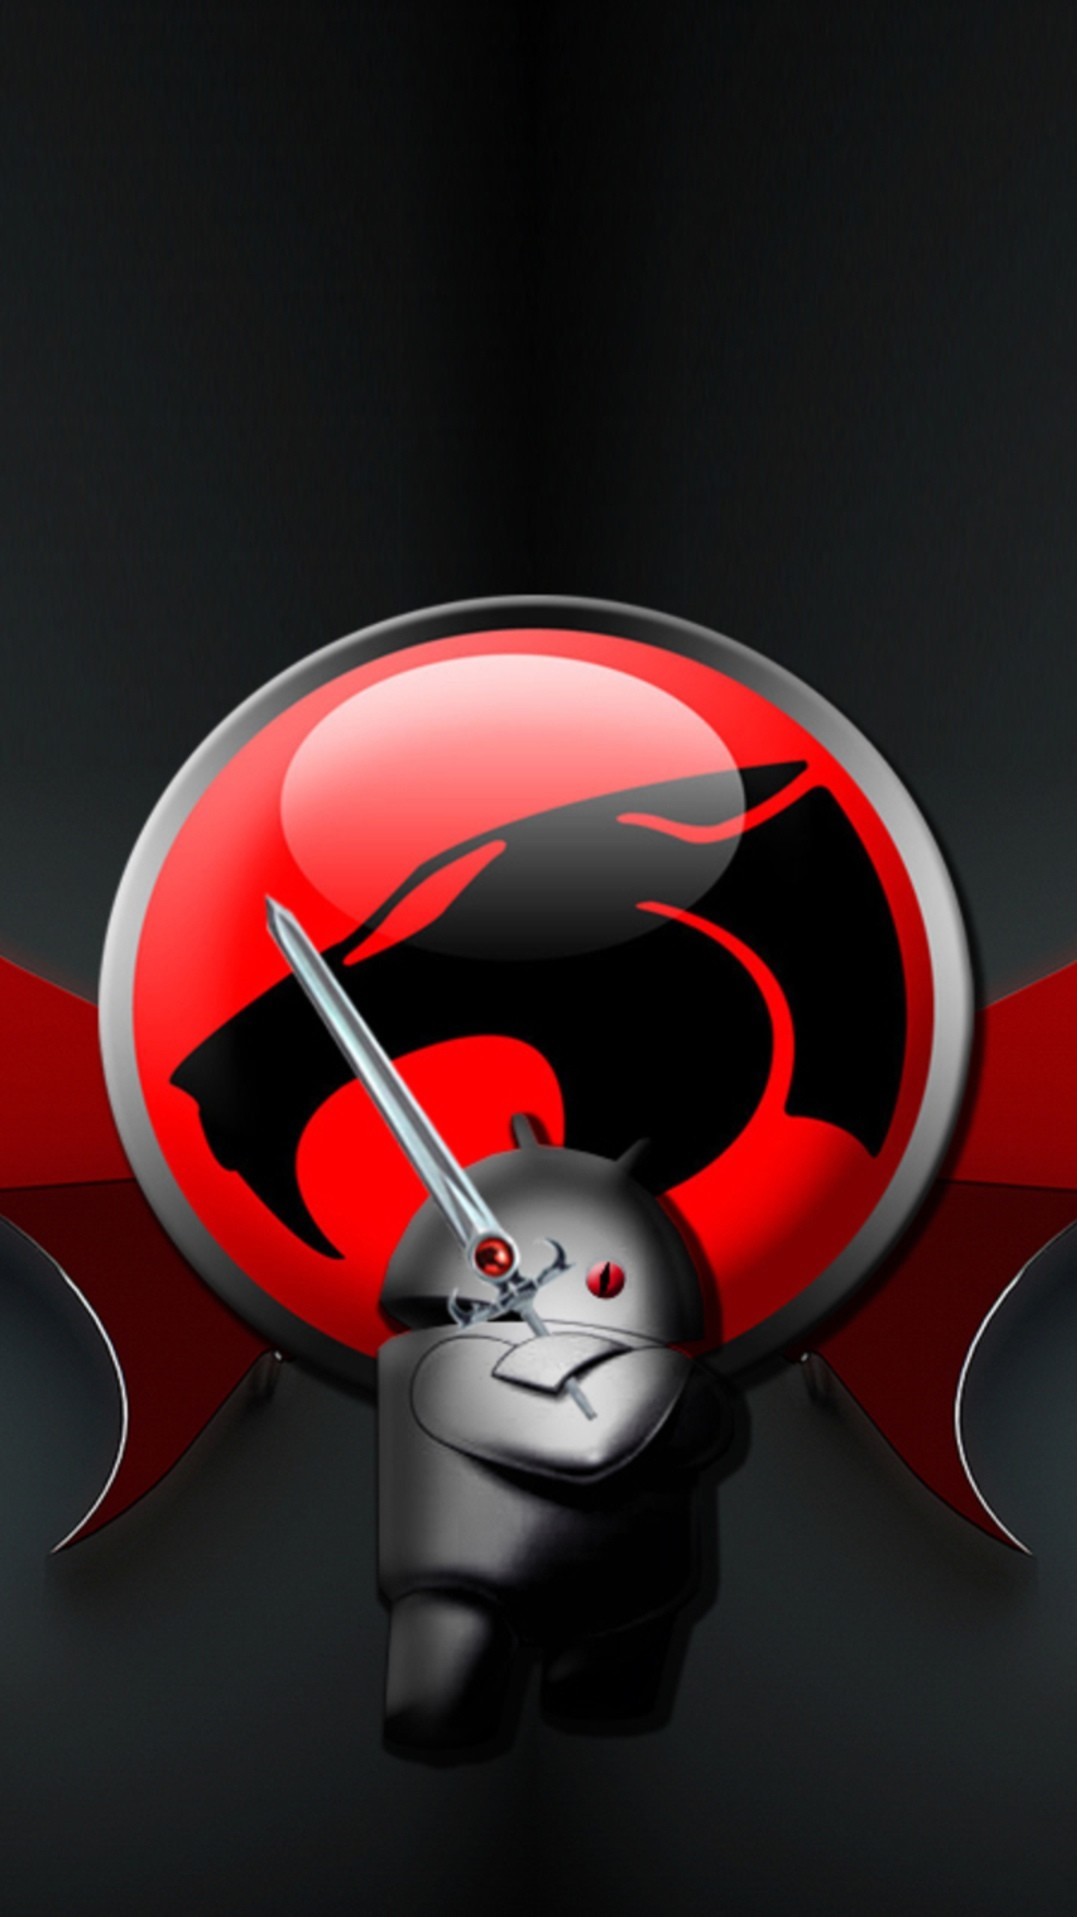 Samsung Galaxy S4 Wallpaper Android Fighter